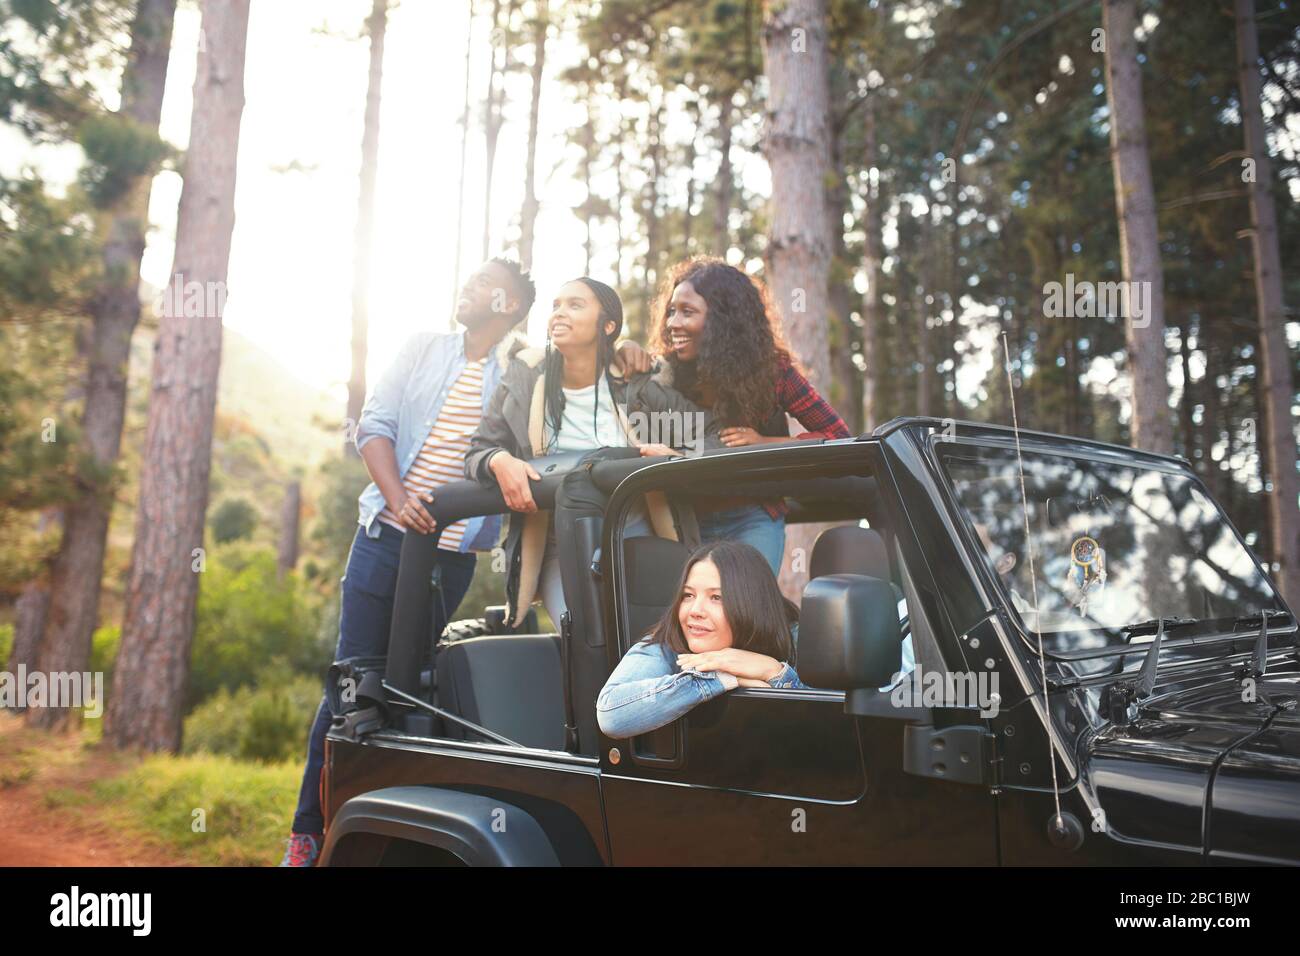 Young friends in jeep looking up at trees in woods, enjoying road trip Stock Photo